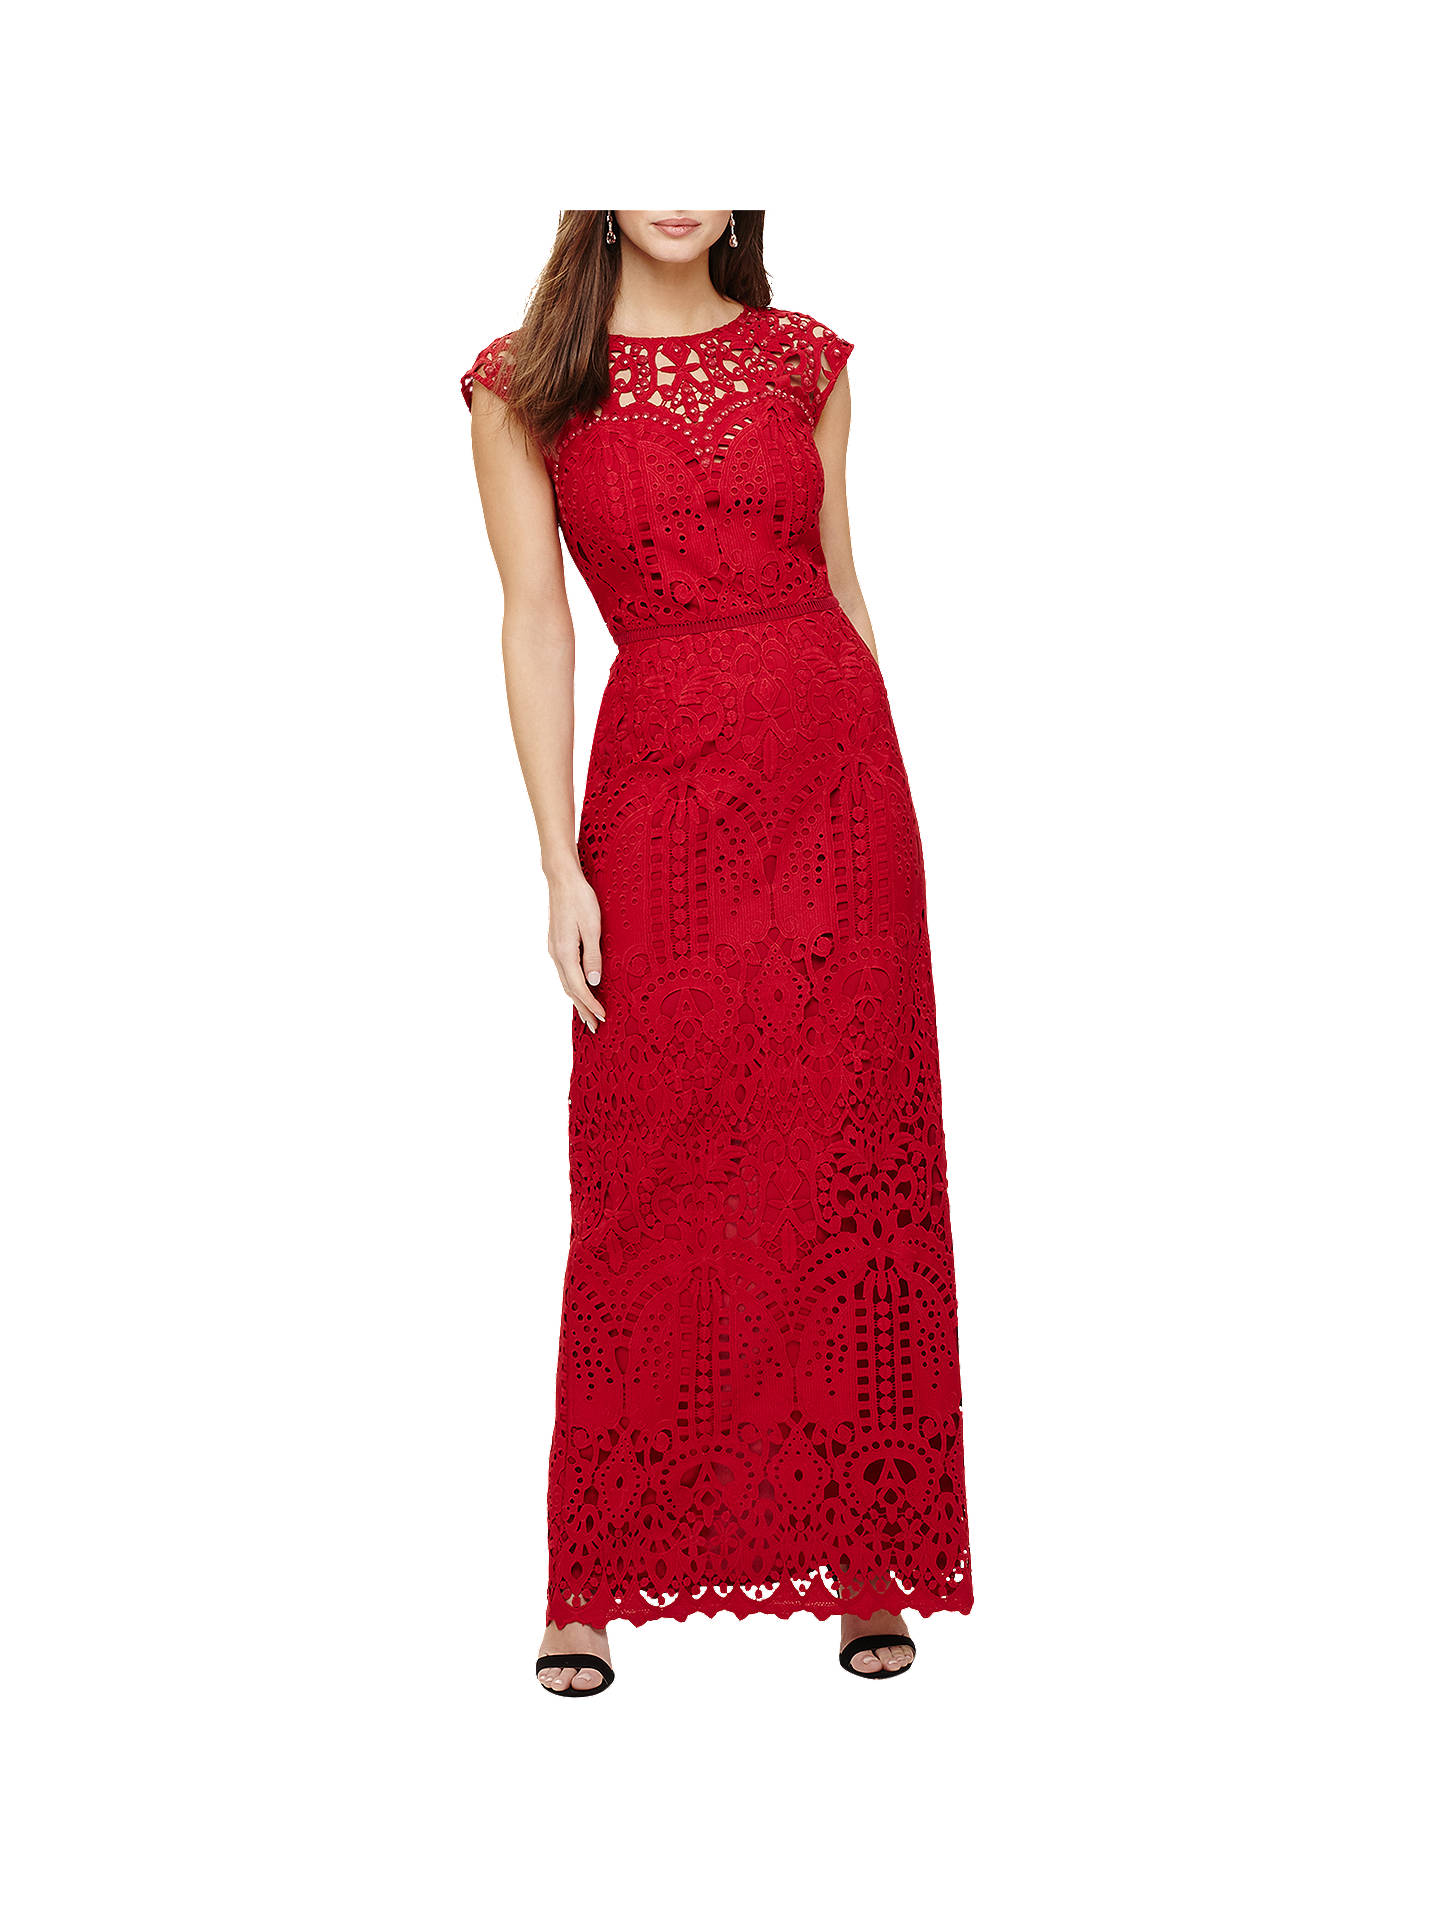 Phase Eight Collection 8 Gloria Lace Dress | Scarlet Red at John Lewis ...